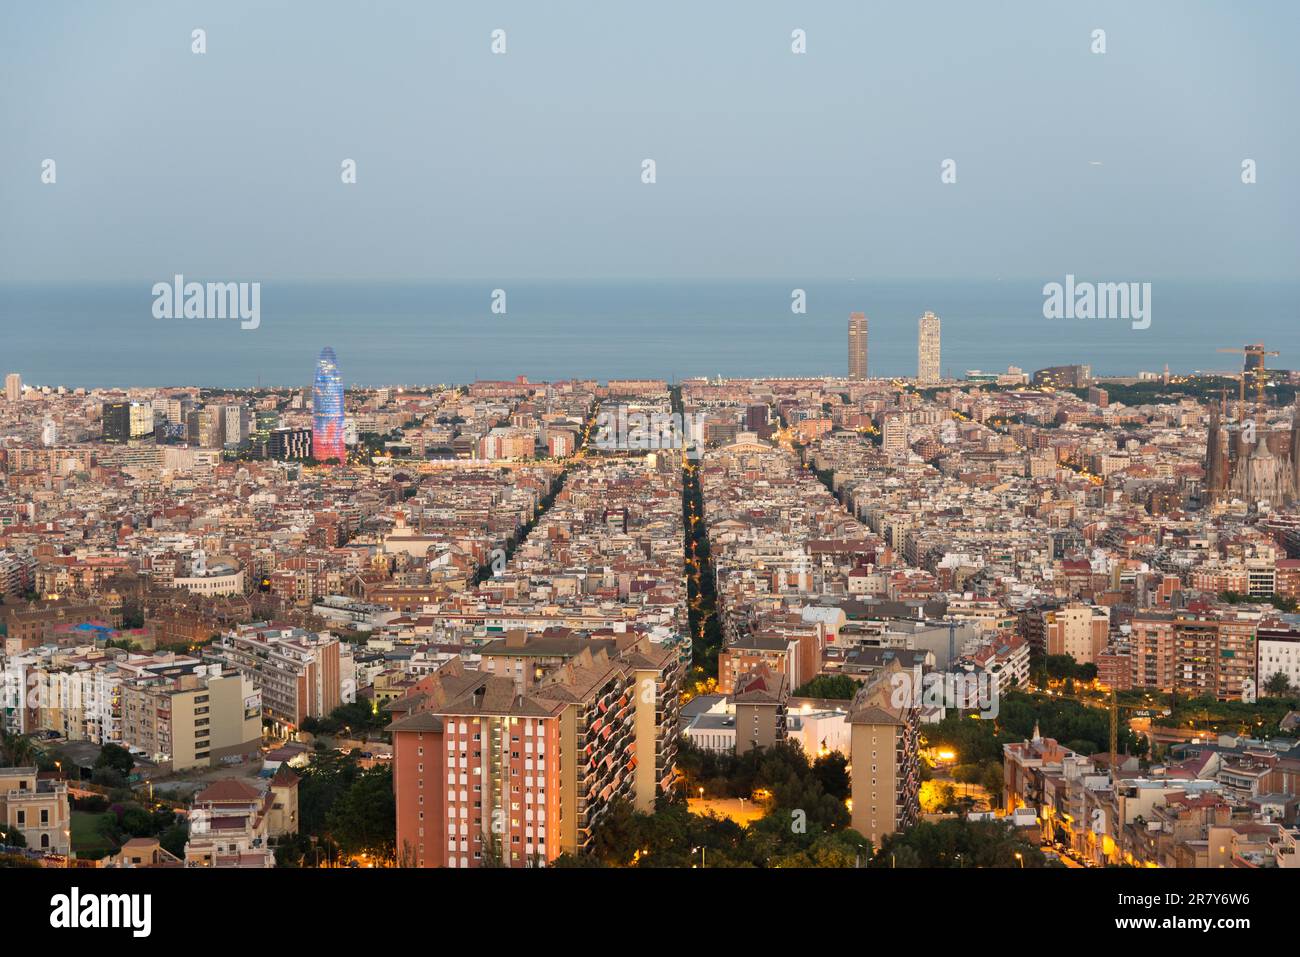 Top view and night photography from an illuminated Barcelona. The panorama shows the famous Sagrada Familia, the illuminated Torre Agbar and the Stock Photo